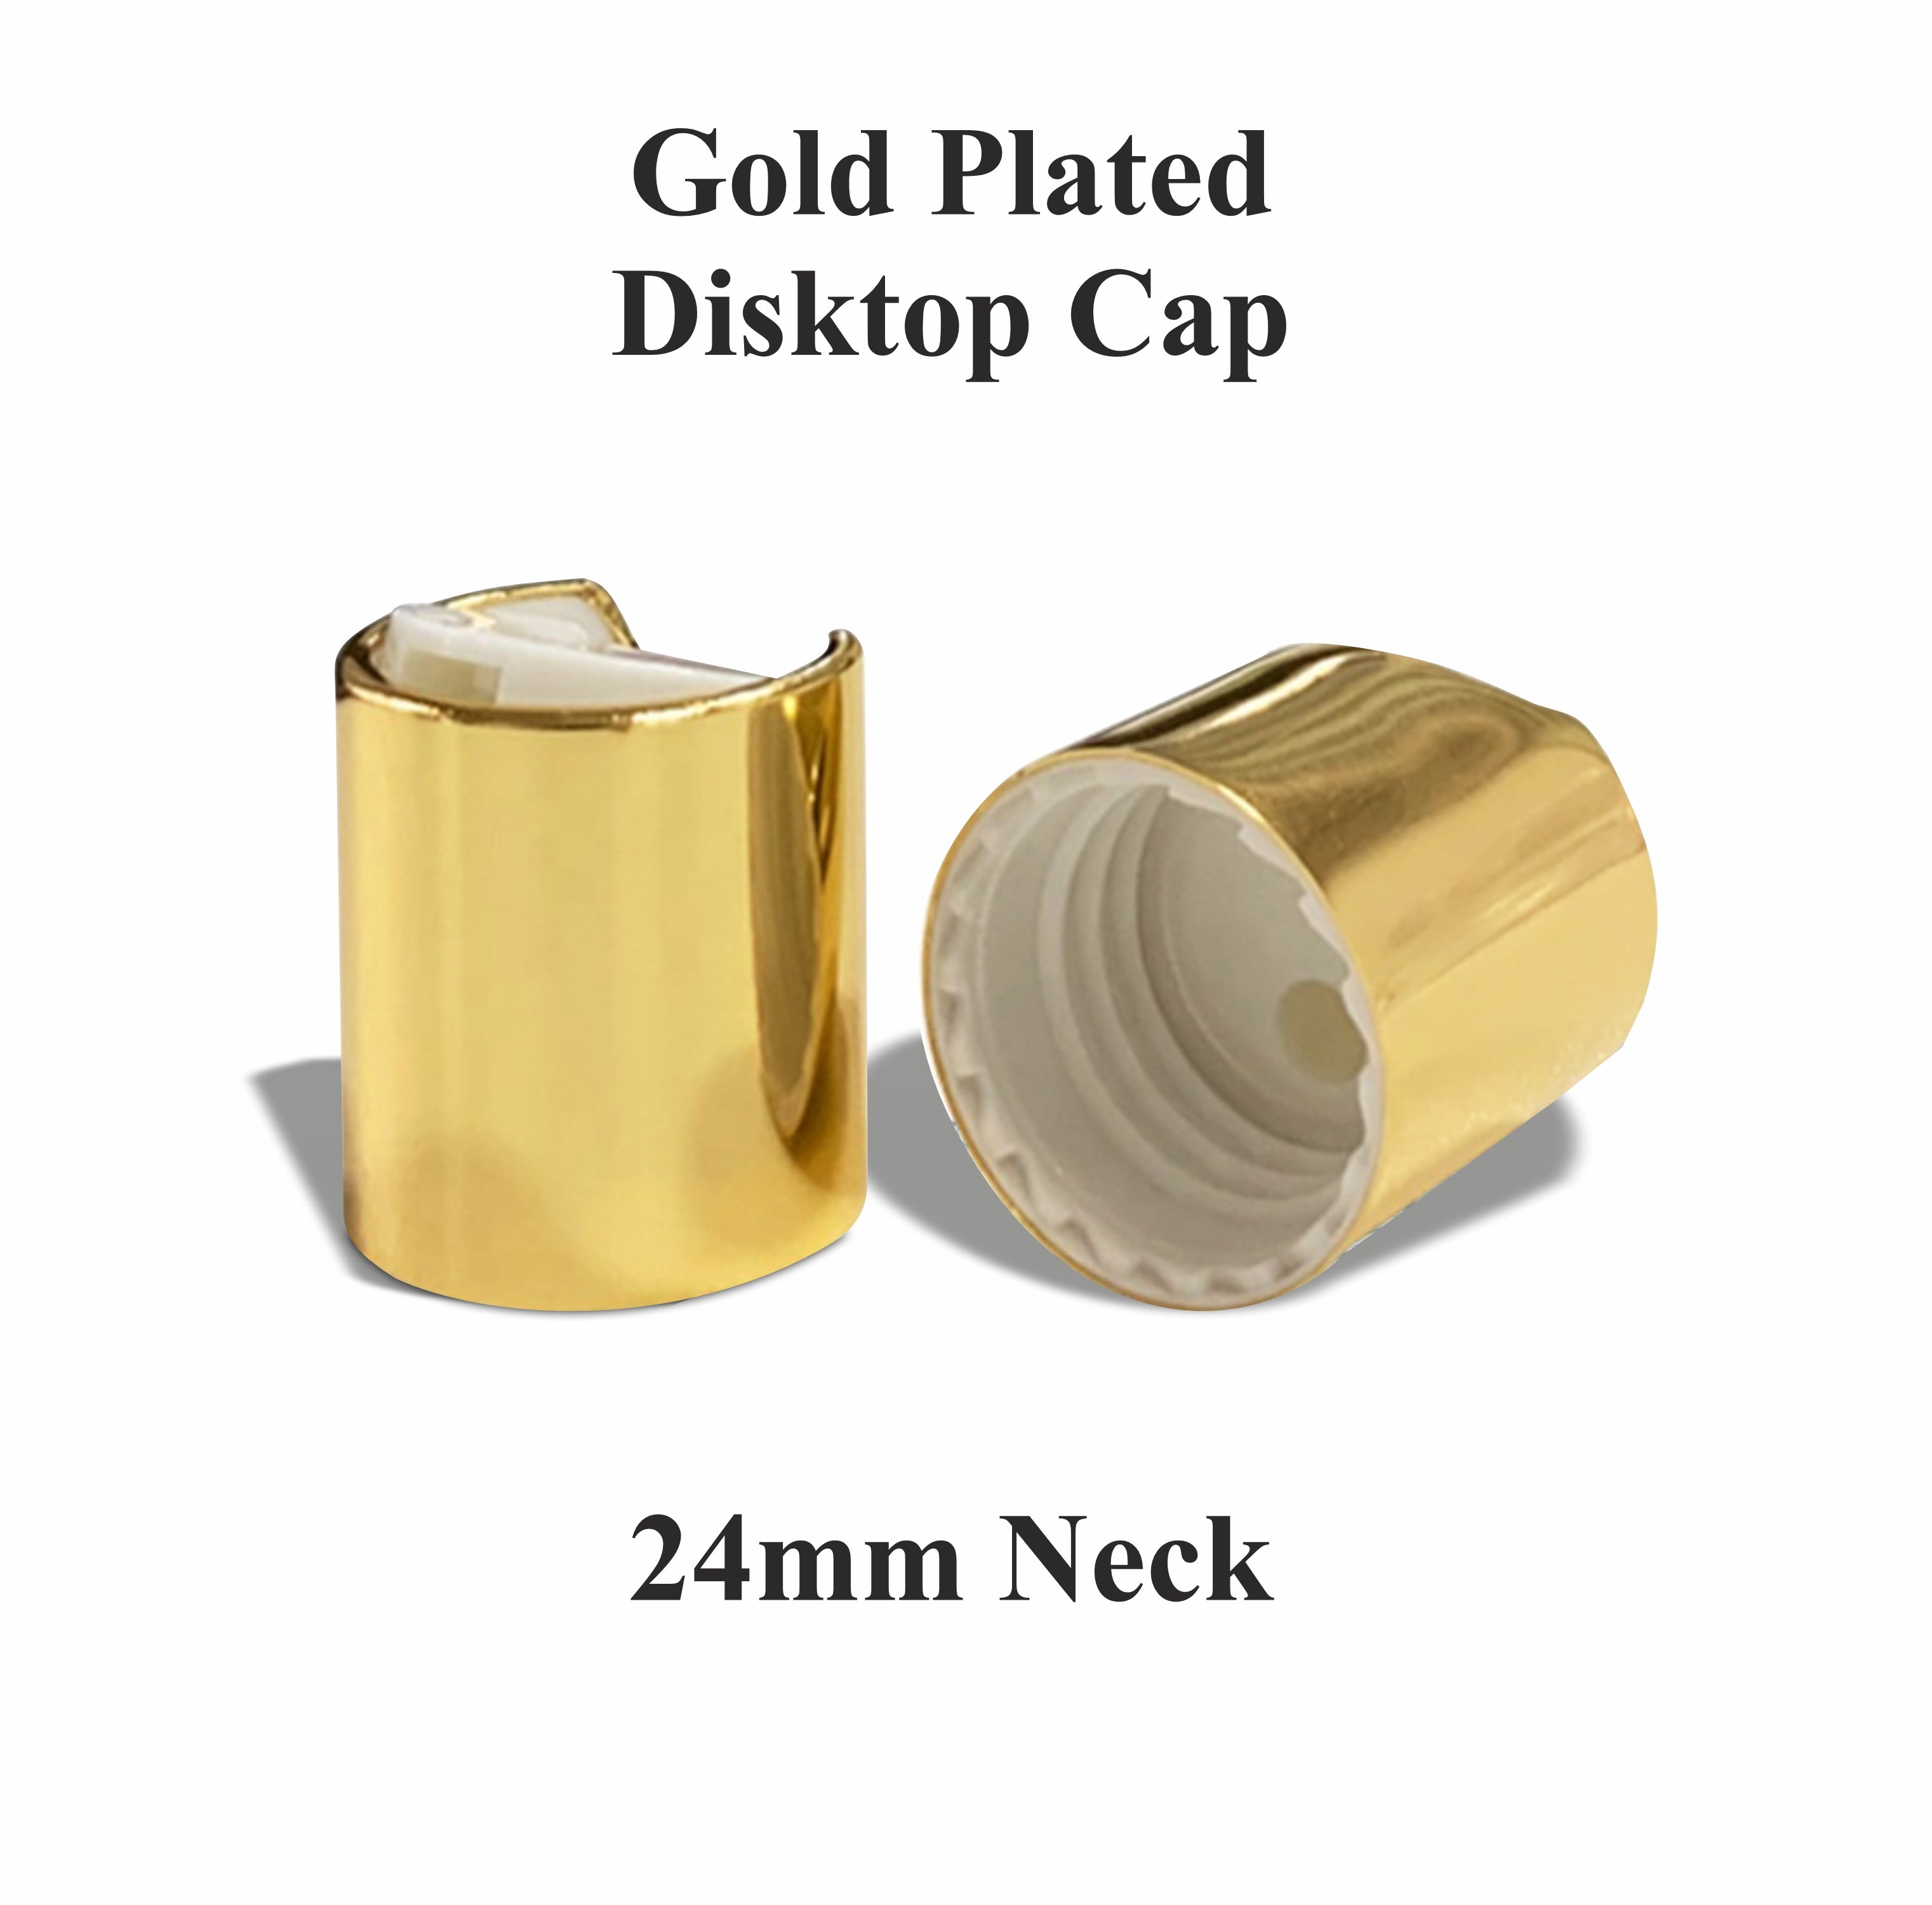 [ZMPC17] Beautiful Gold Plated White Disktop Cap - 24mm Neck